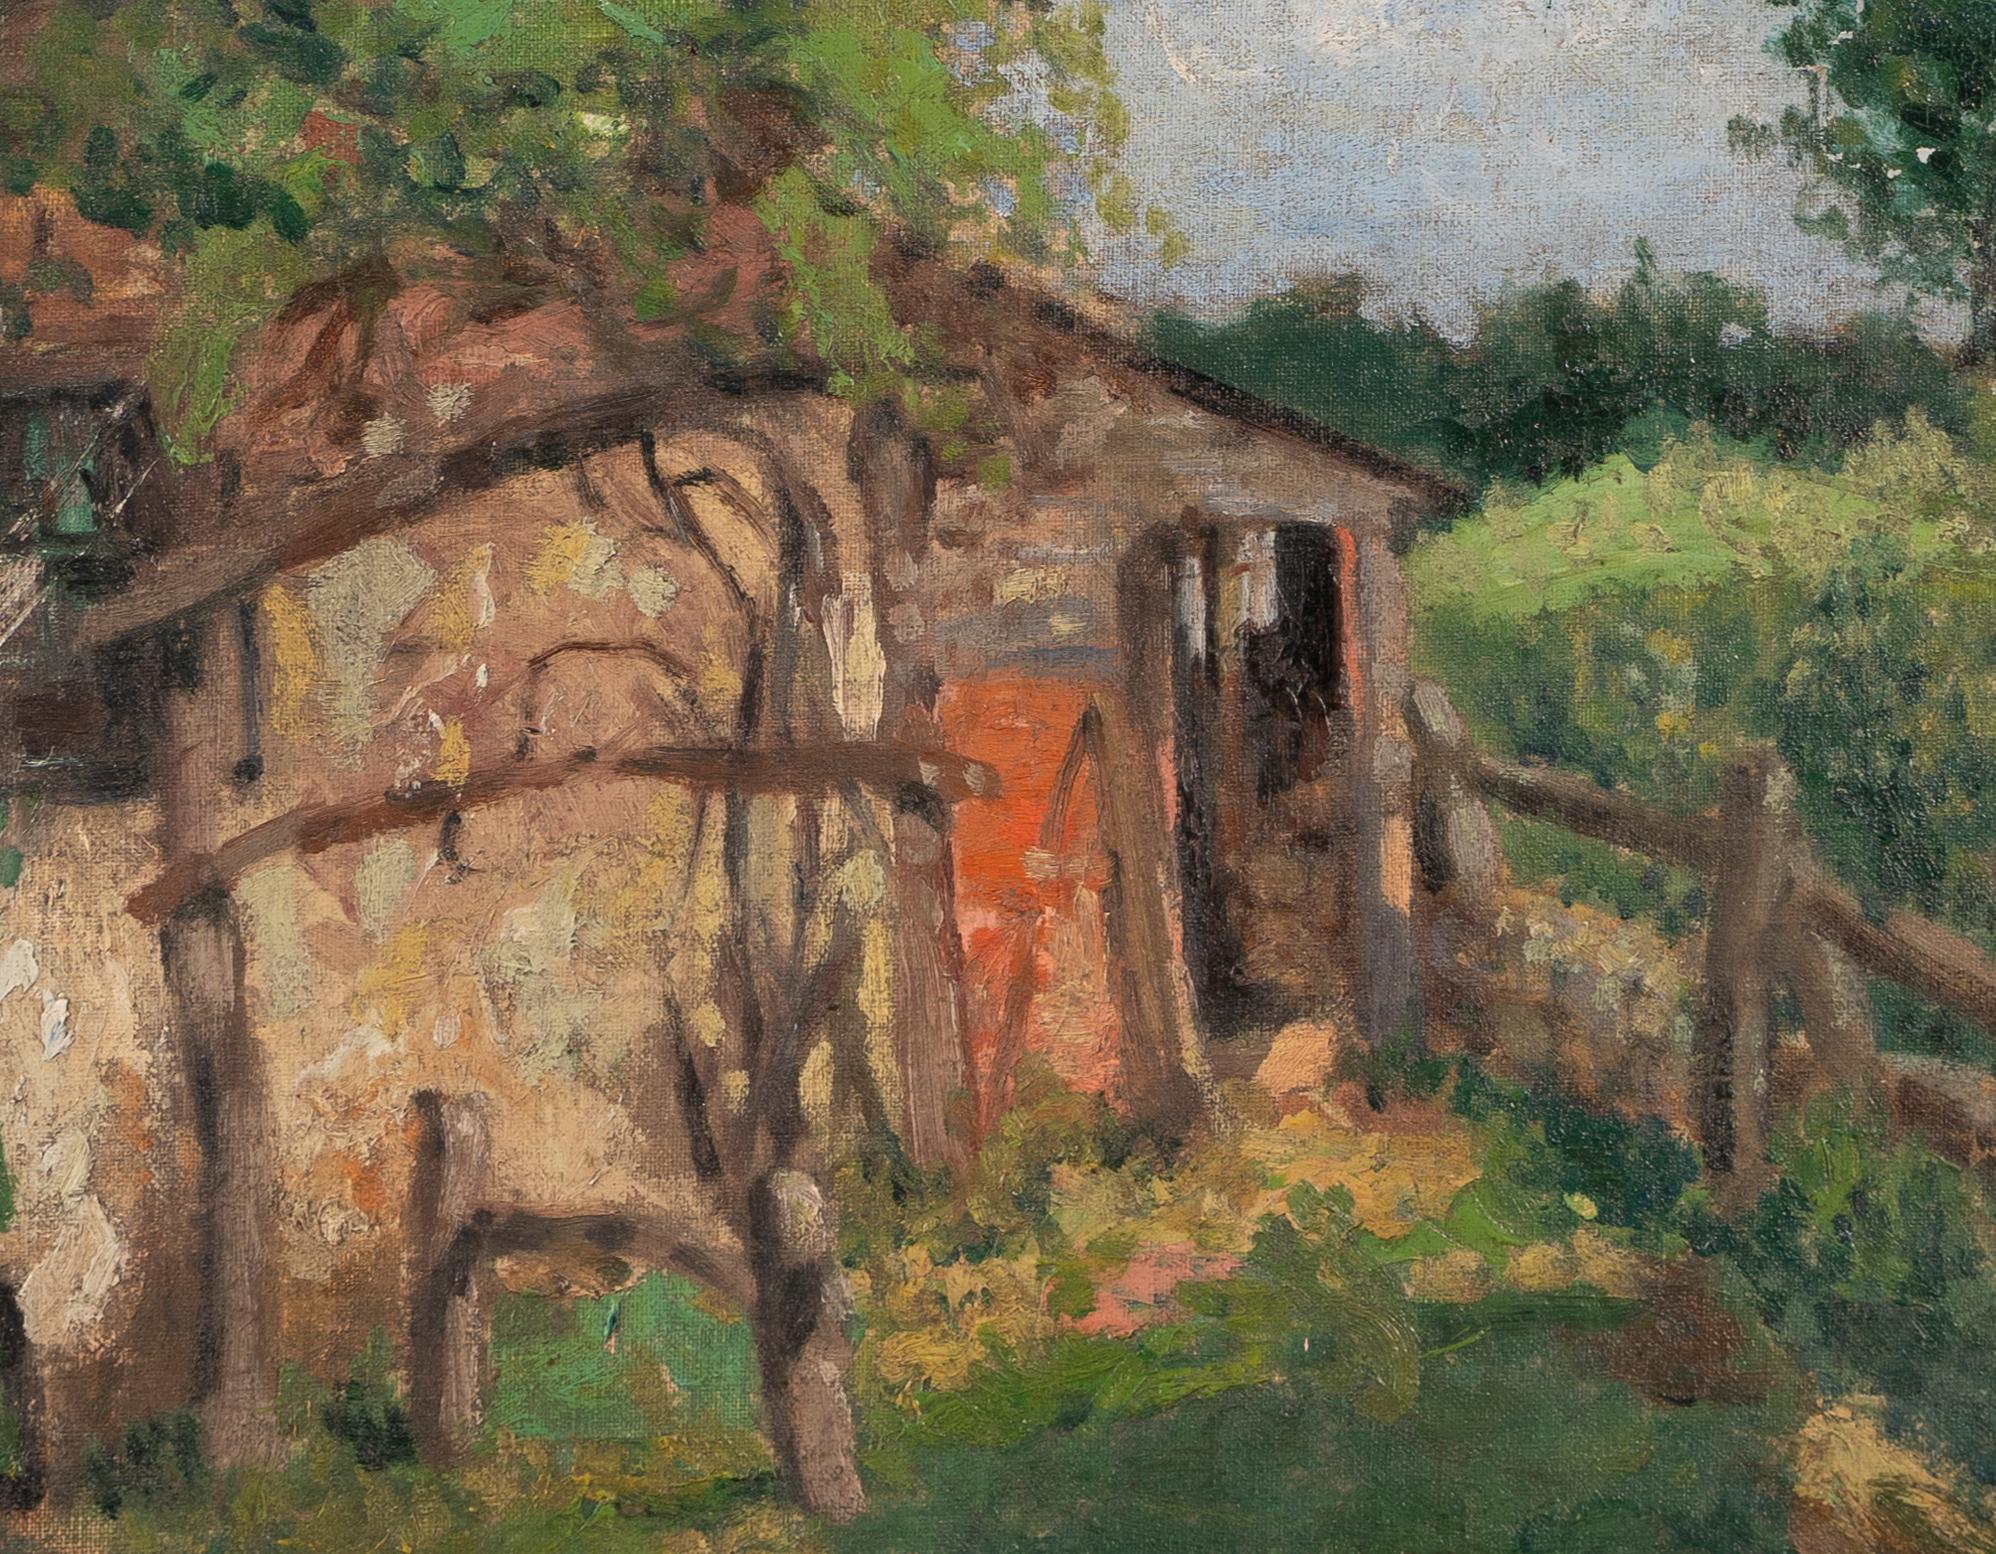 Antique American impressionist  landscape oil painting.  Oil on board, circa 1920.  Non signée.  Image size, 16L x 13H.  Housed in a period  frame.